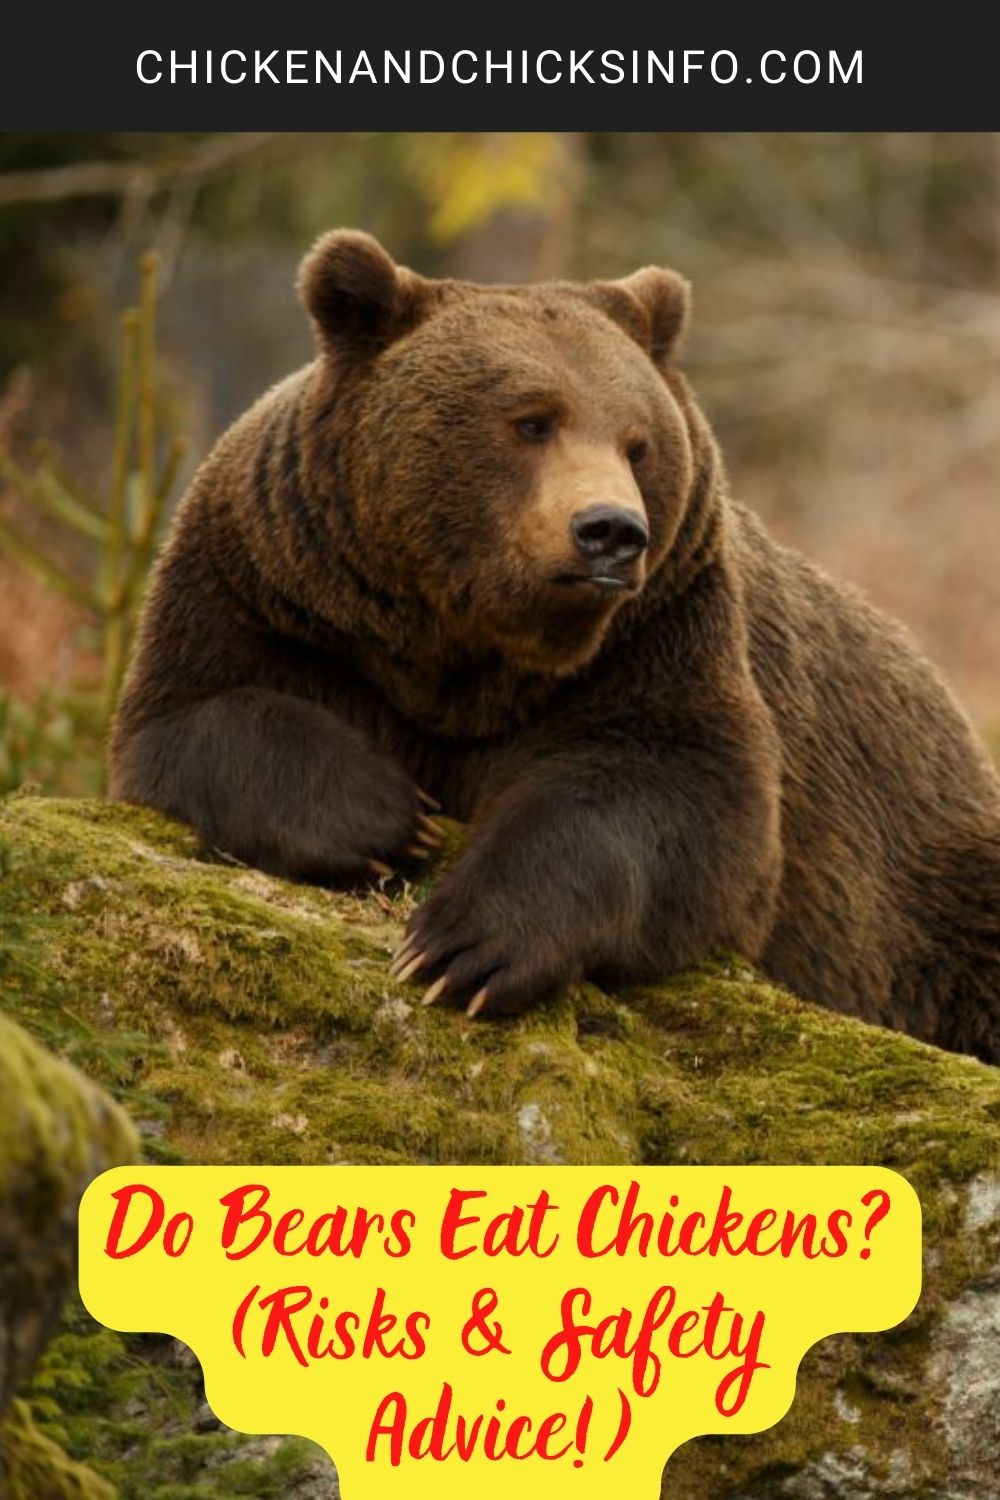 Do Bears Eat Chickens? (Risks & Safety Advice!) poster.